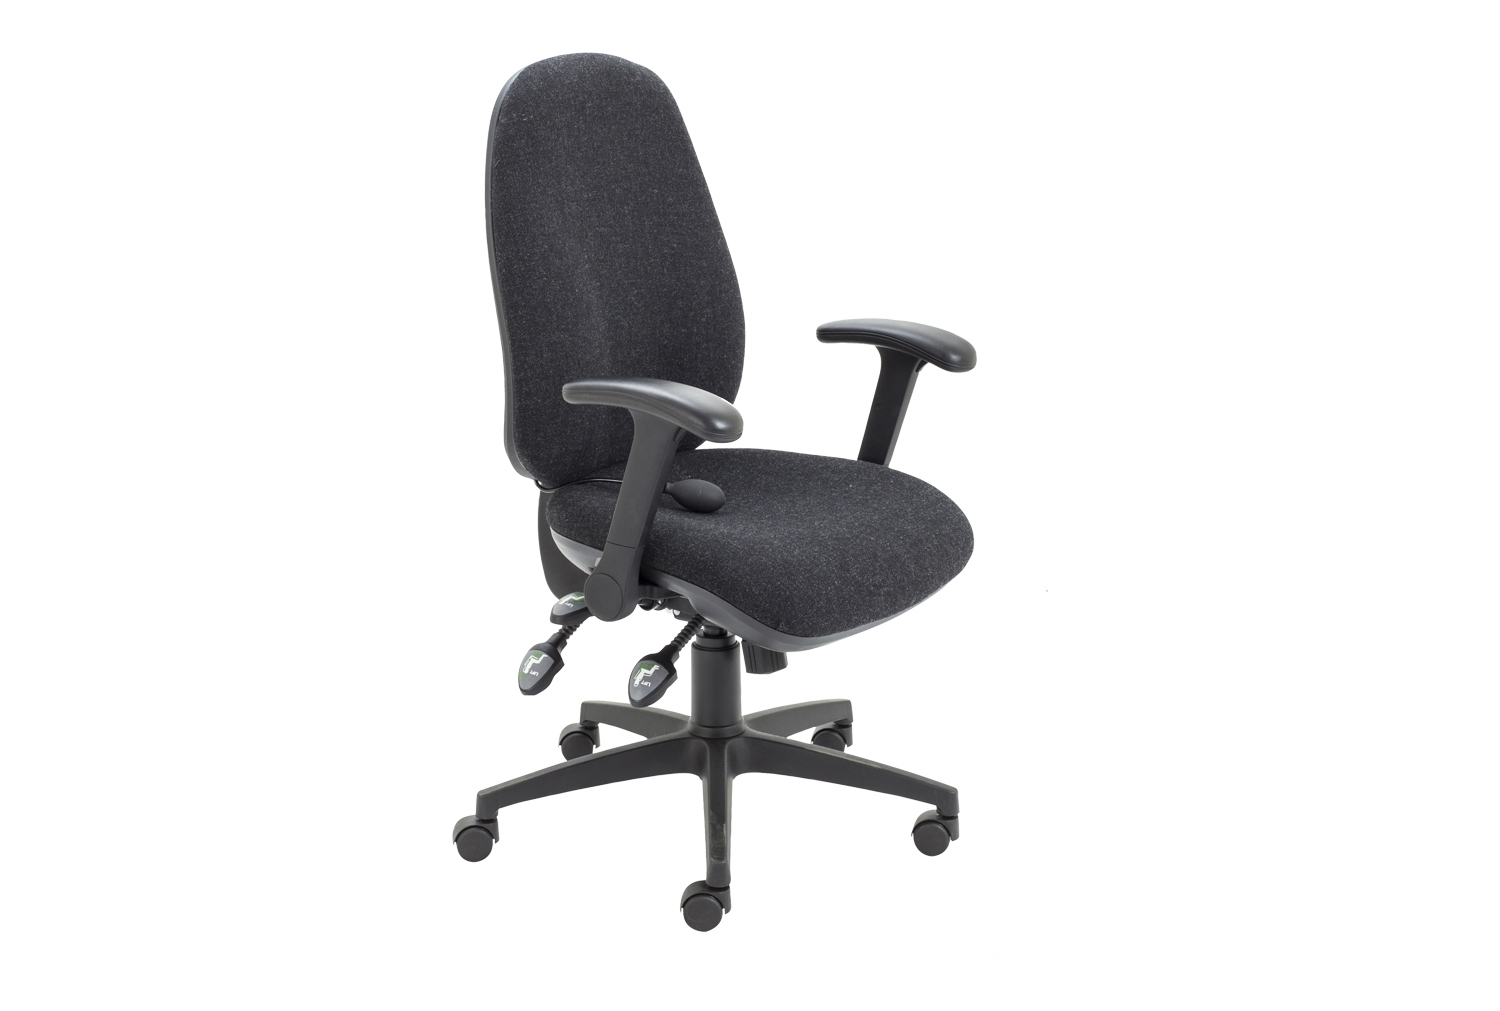 Orchid Deluxe Lumbar Pump Ergonomic Operator Office Chair With Folding Arms, Charcoal, Express Delivery